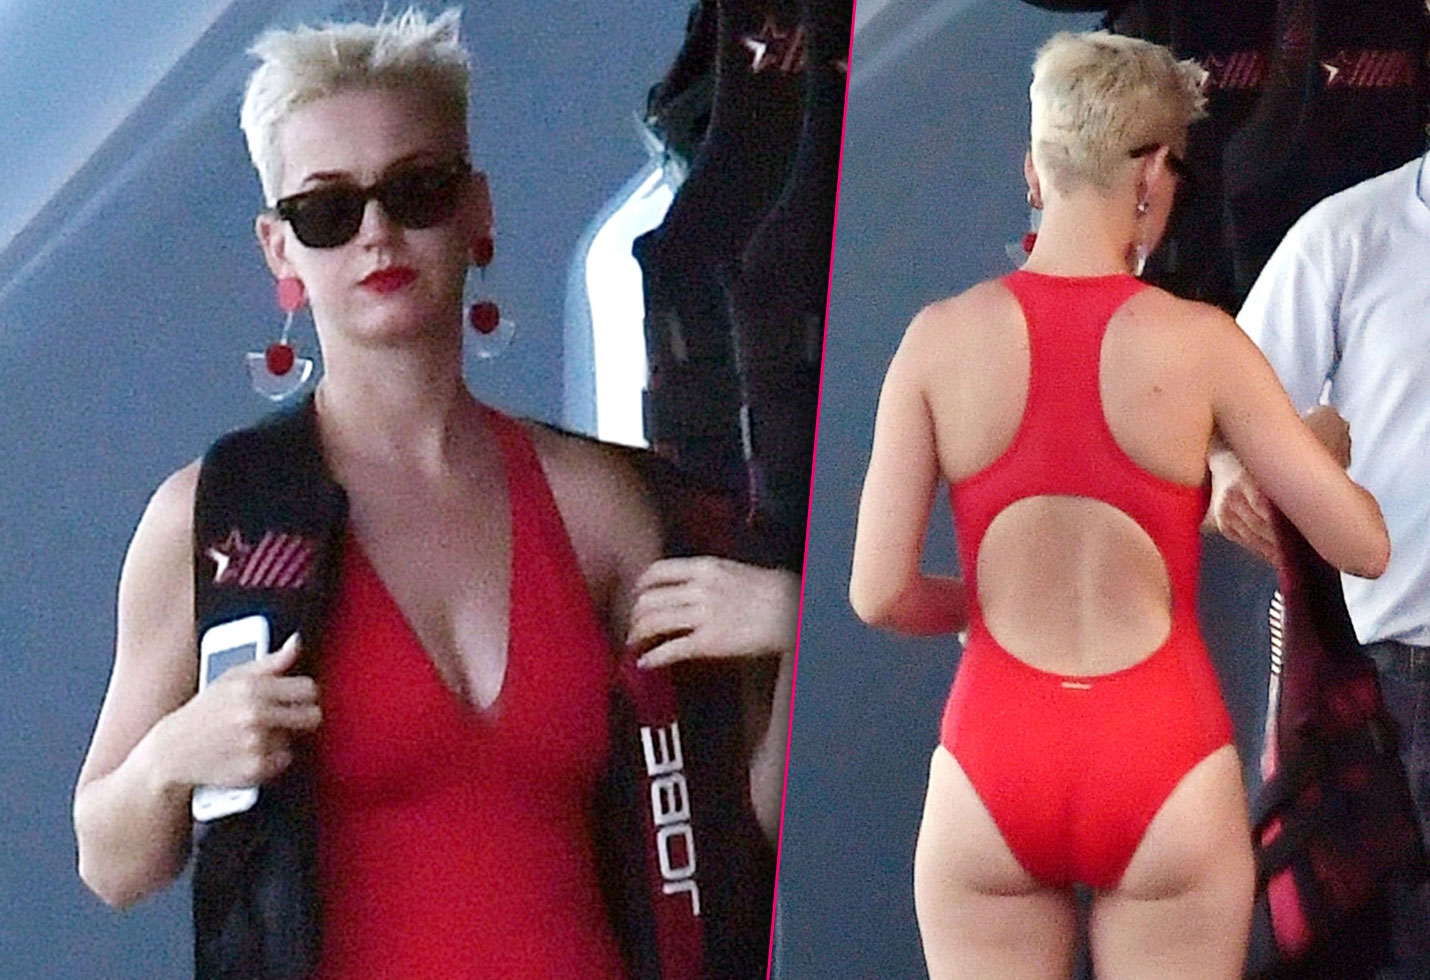 Photos Katy Perry S Butt Is Falling Out Of Her Tiny Swimsuit.